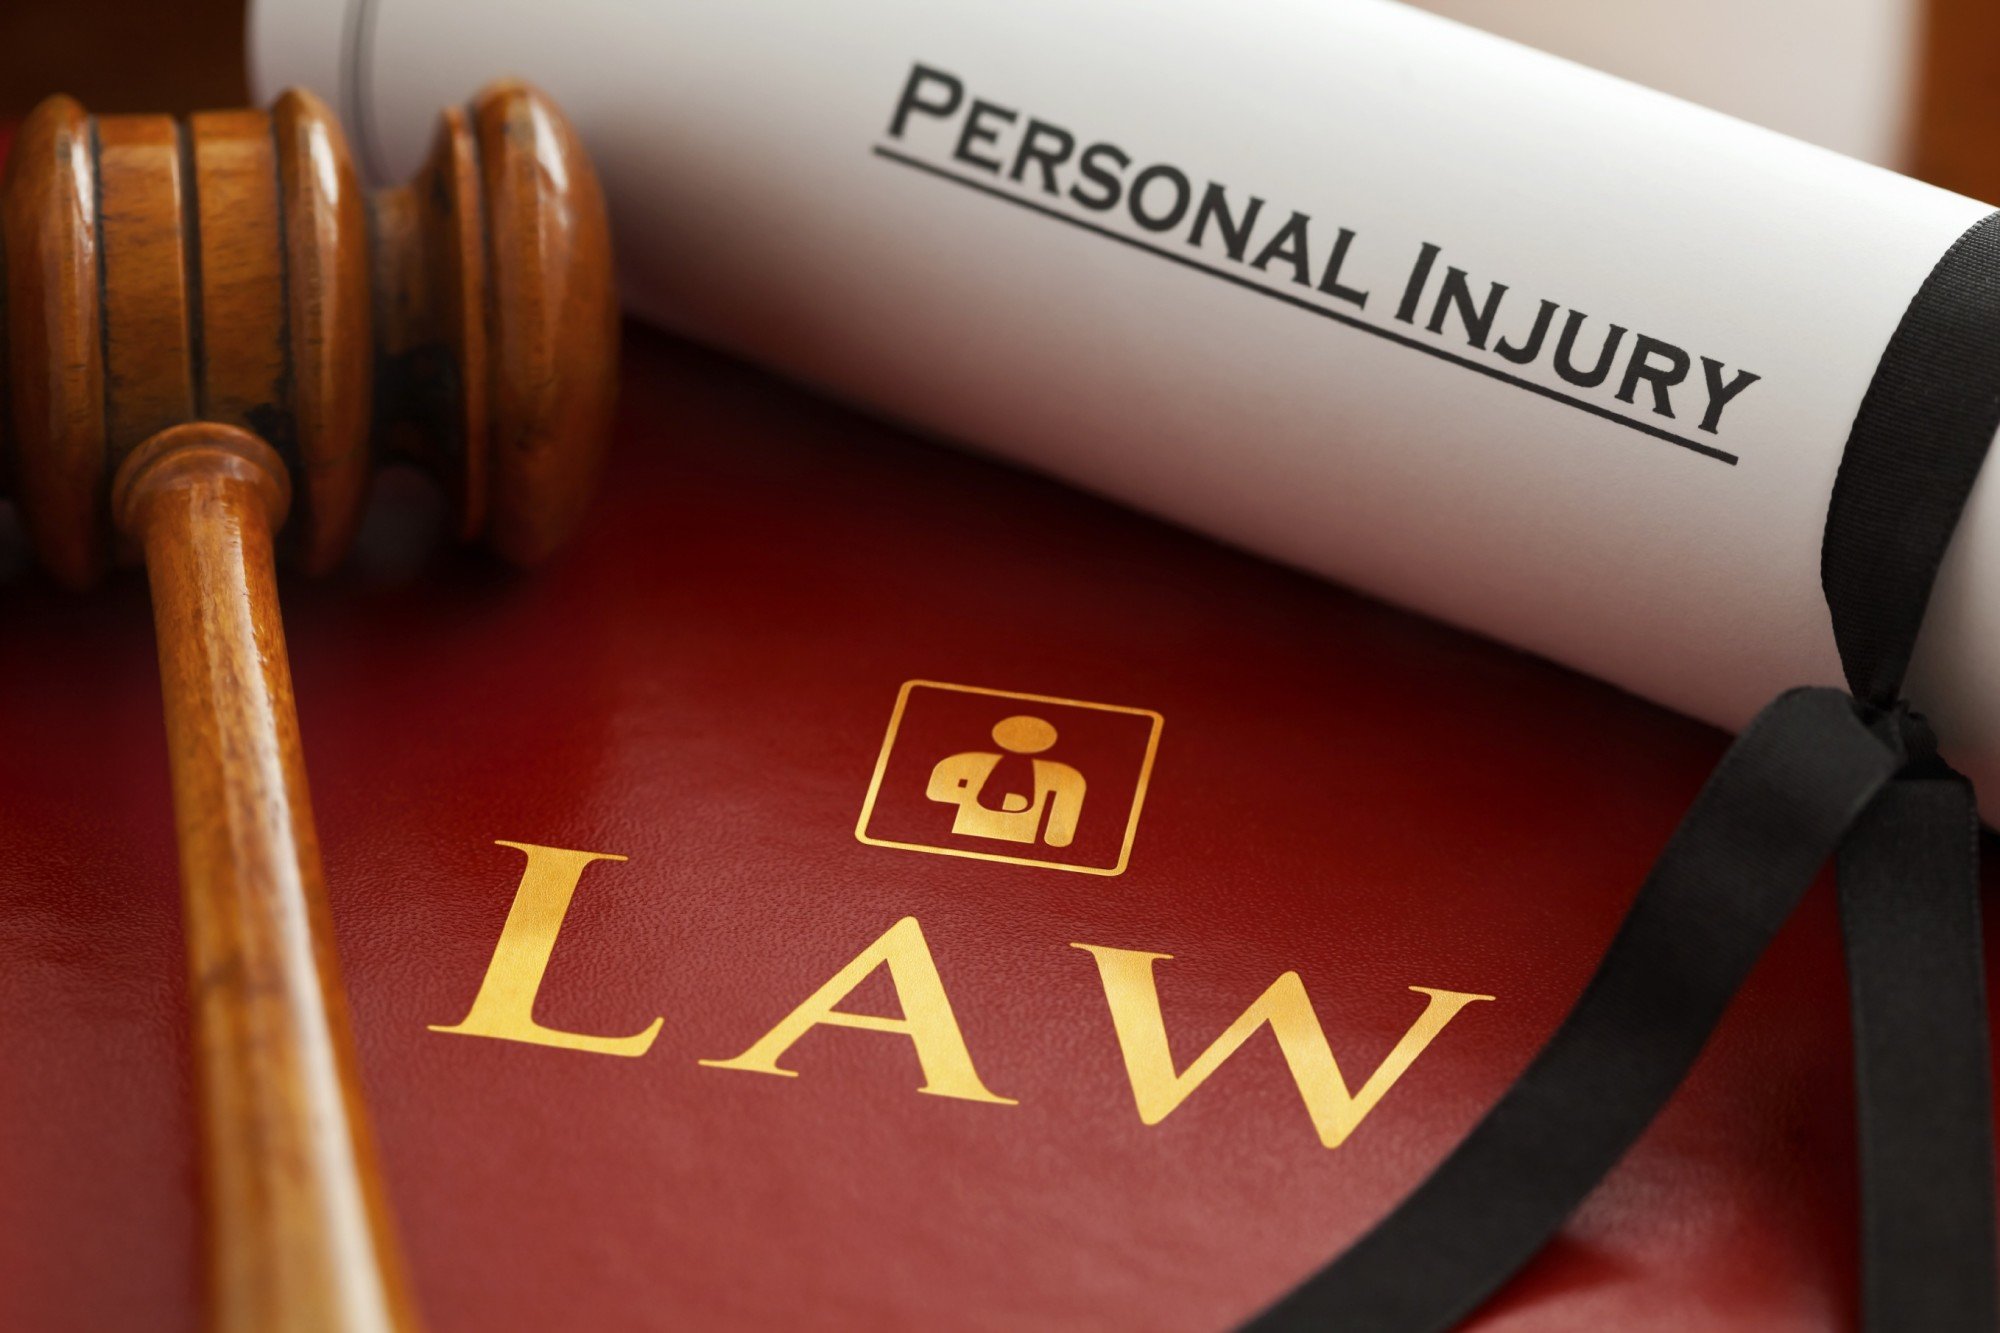 Are you wondering whether or not you should seek legal help for your personal injury case? Here are 5 signs it's time to call a lawyer.